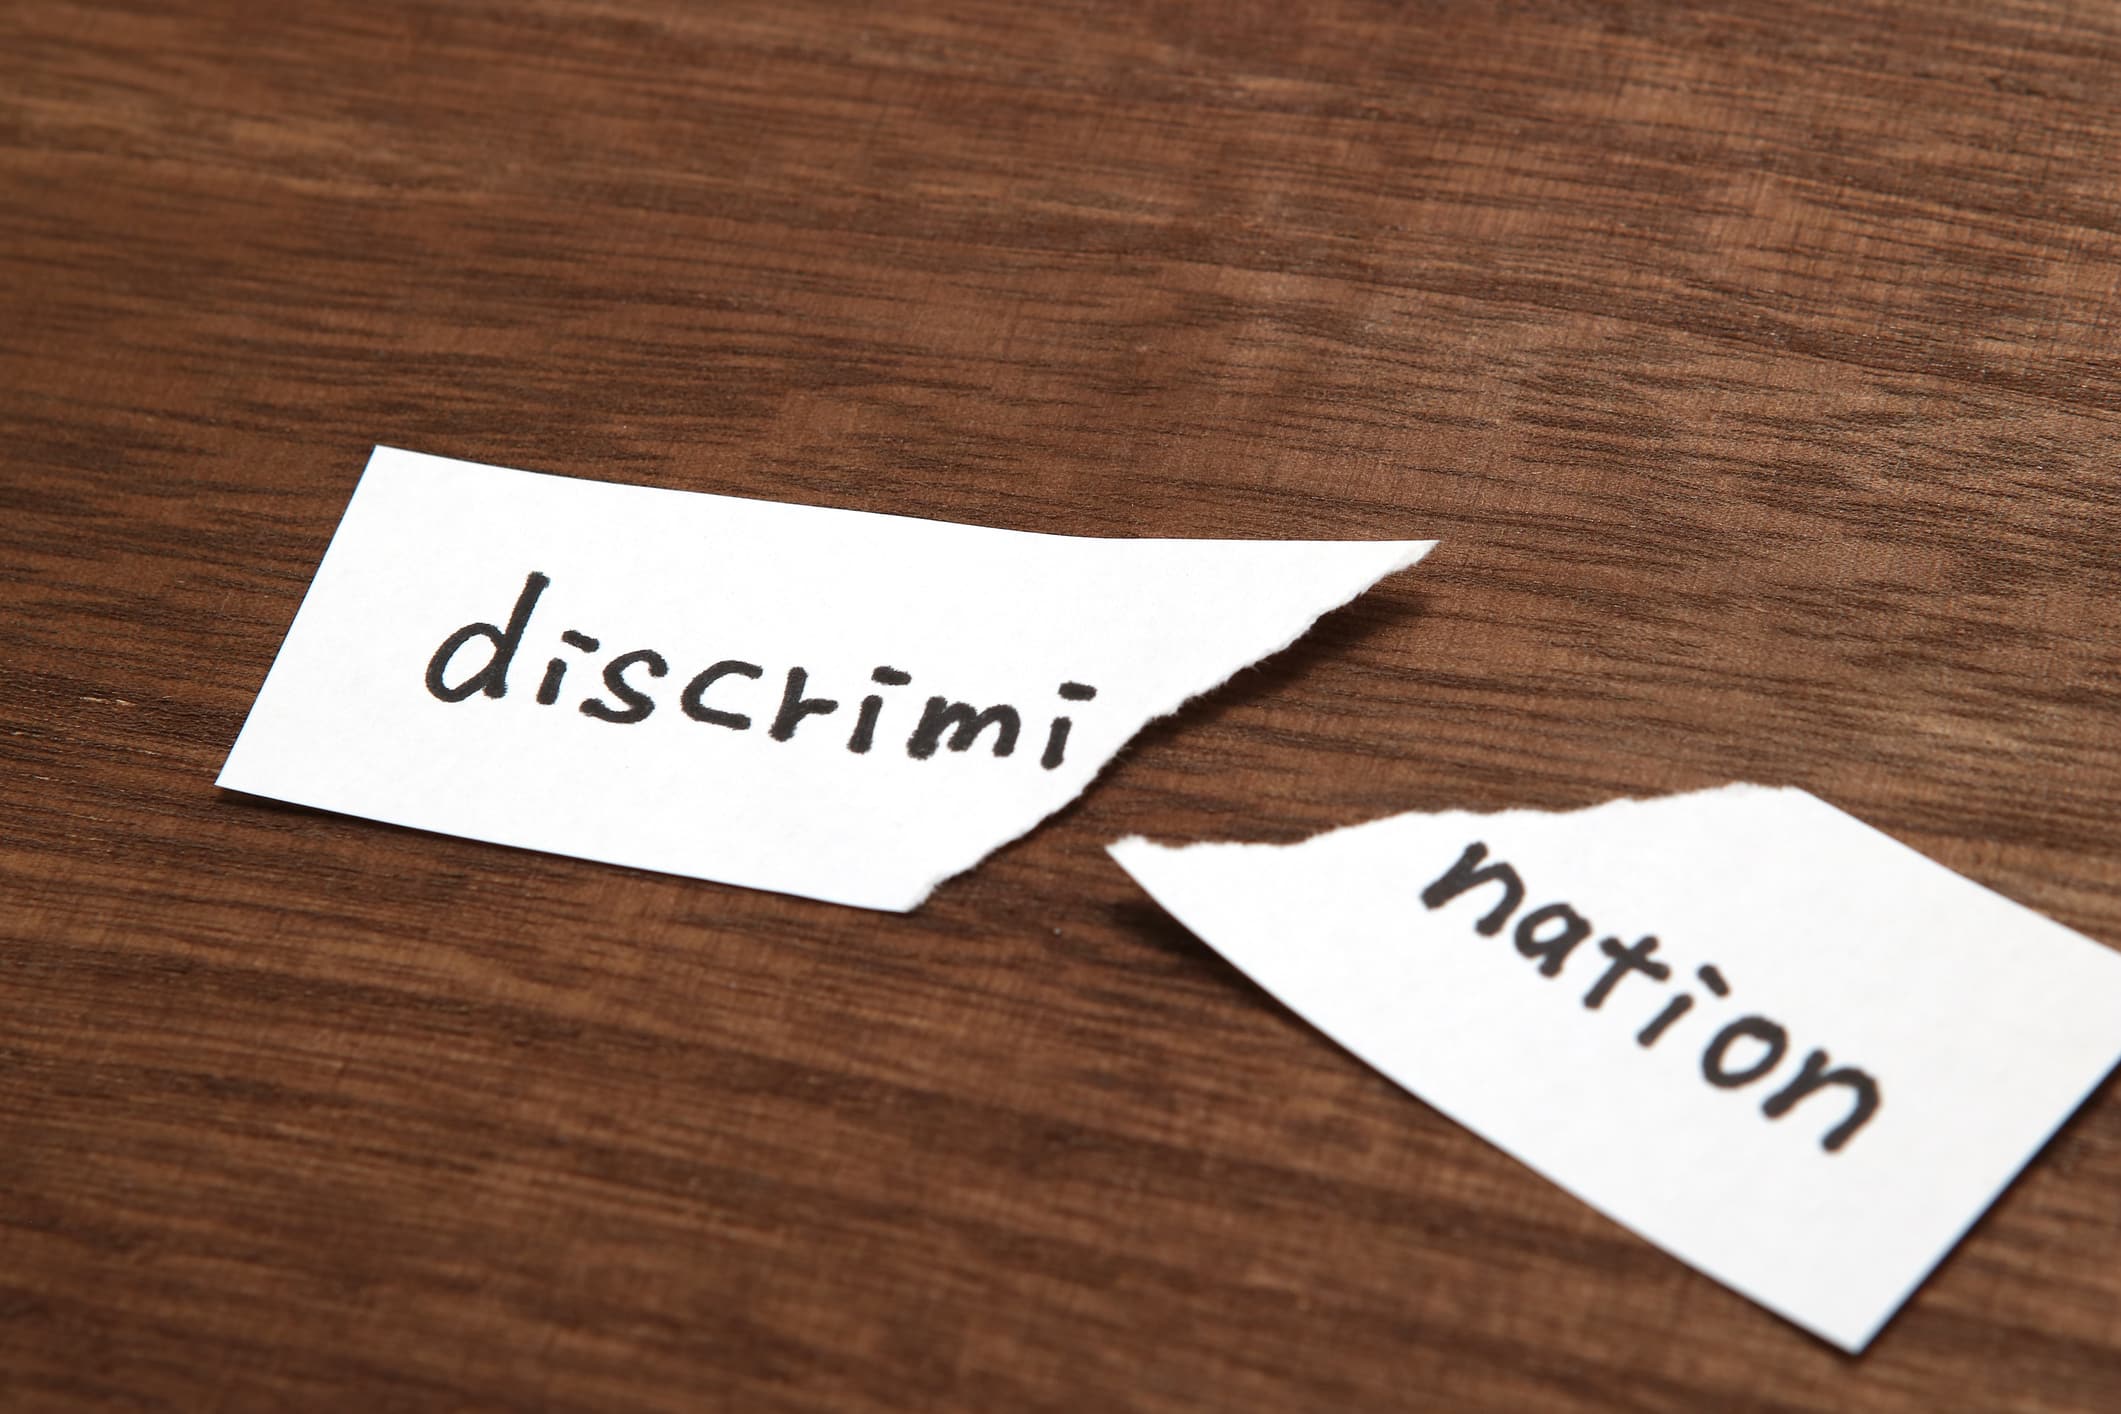 The paper written as discrimination is torn on wood. Concept of abolition of discrimination.